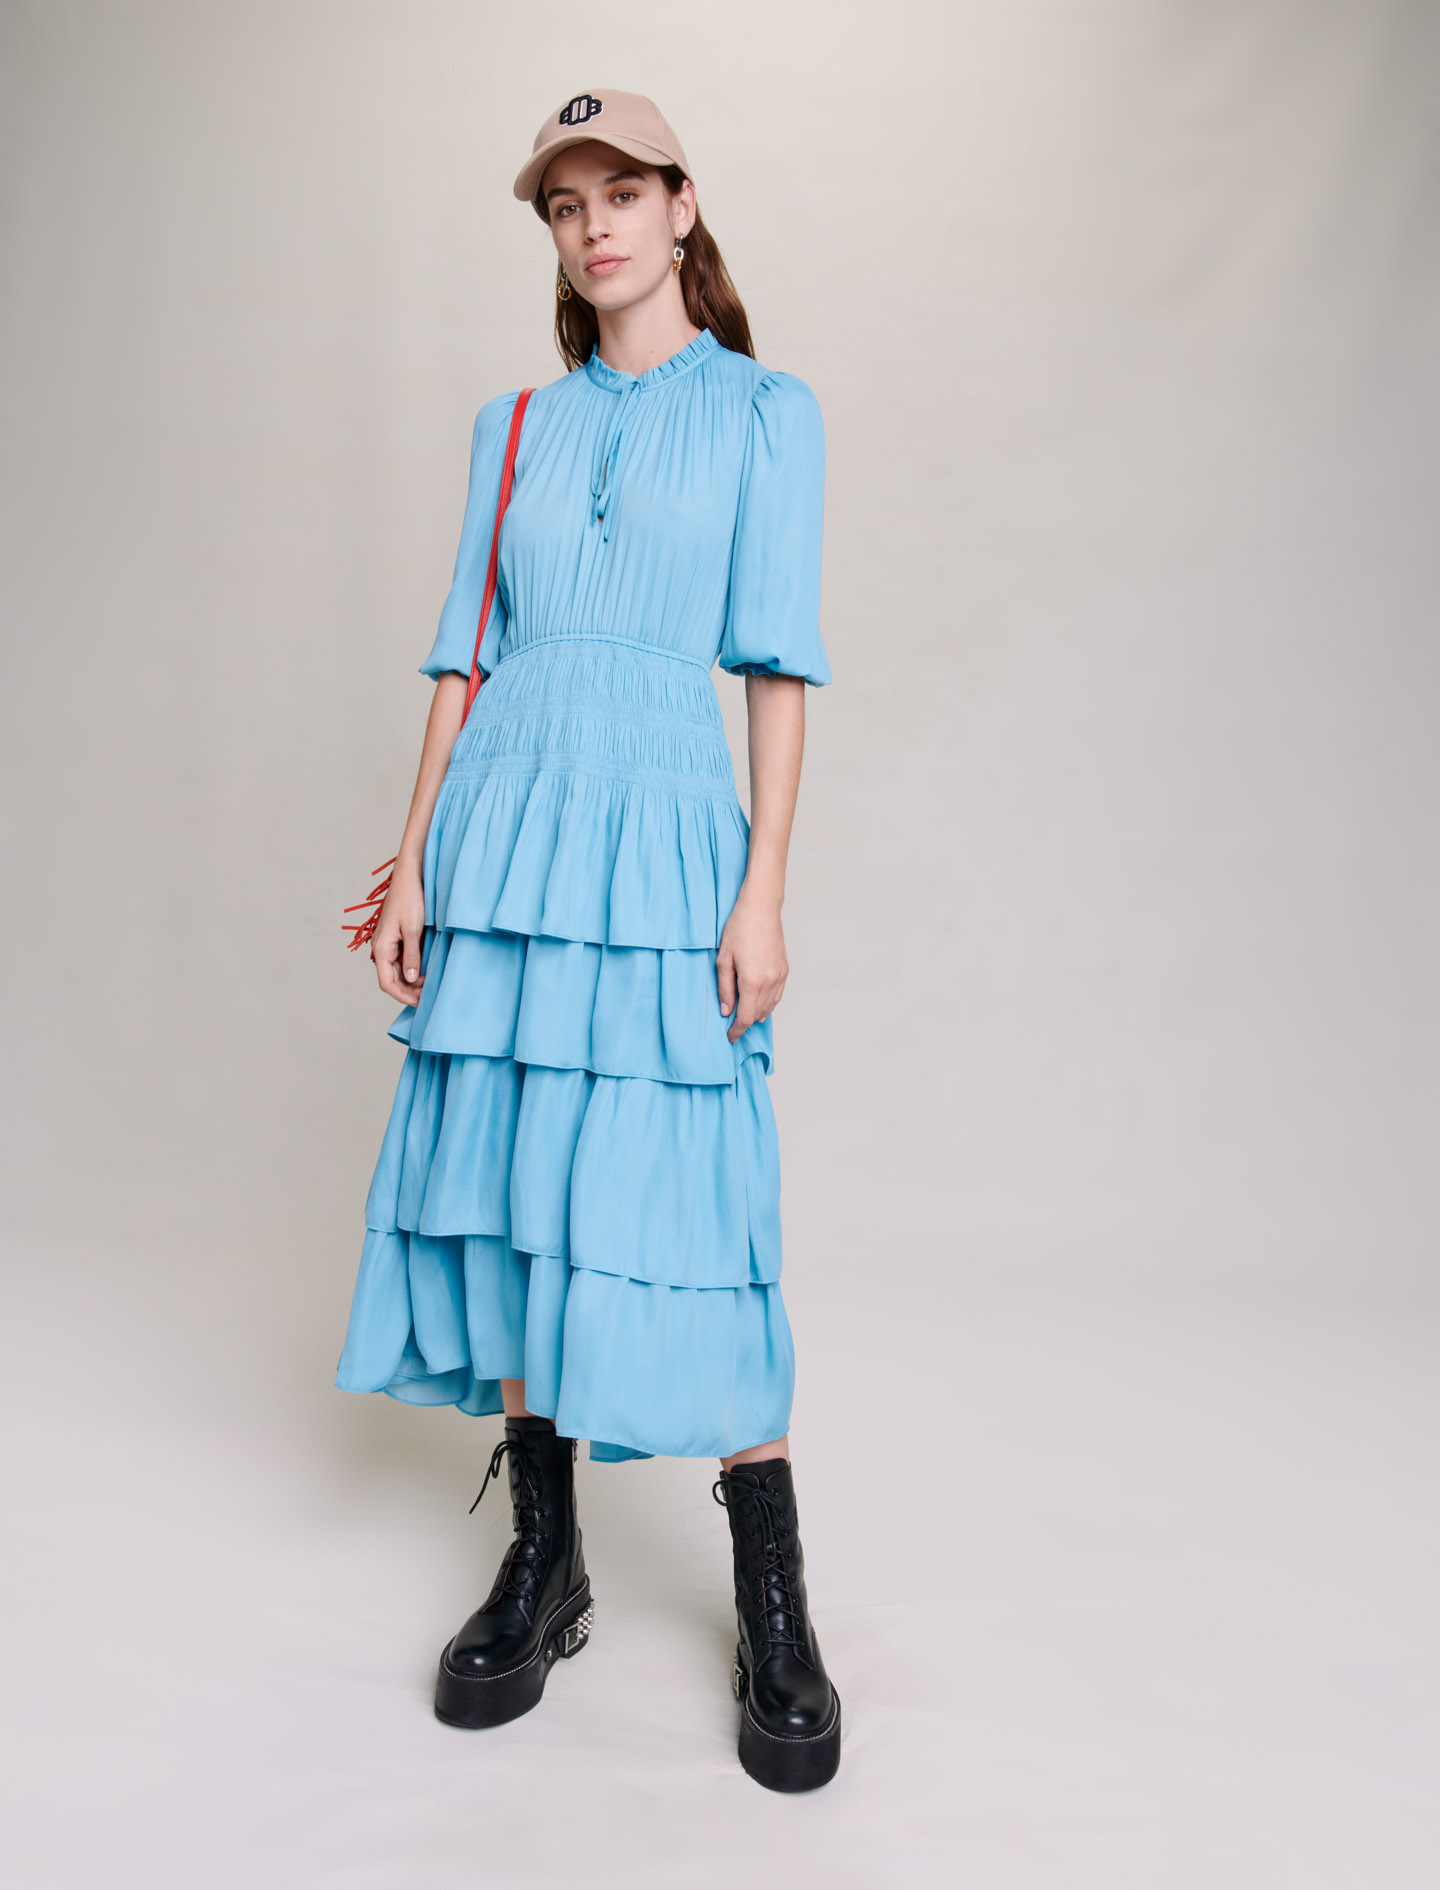 Maje Woman's polyester Long satiny dress with ruffles, in color Light Blue / Blue